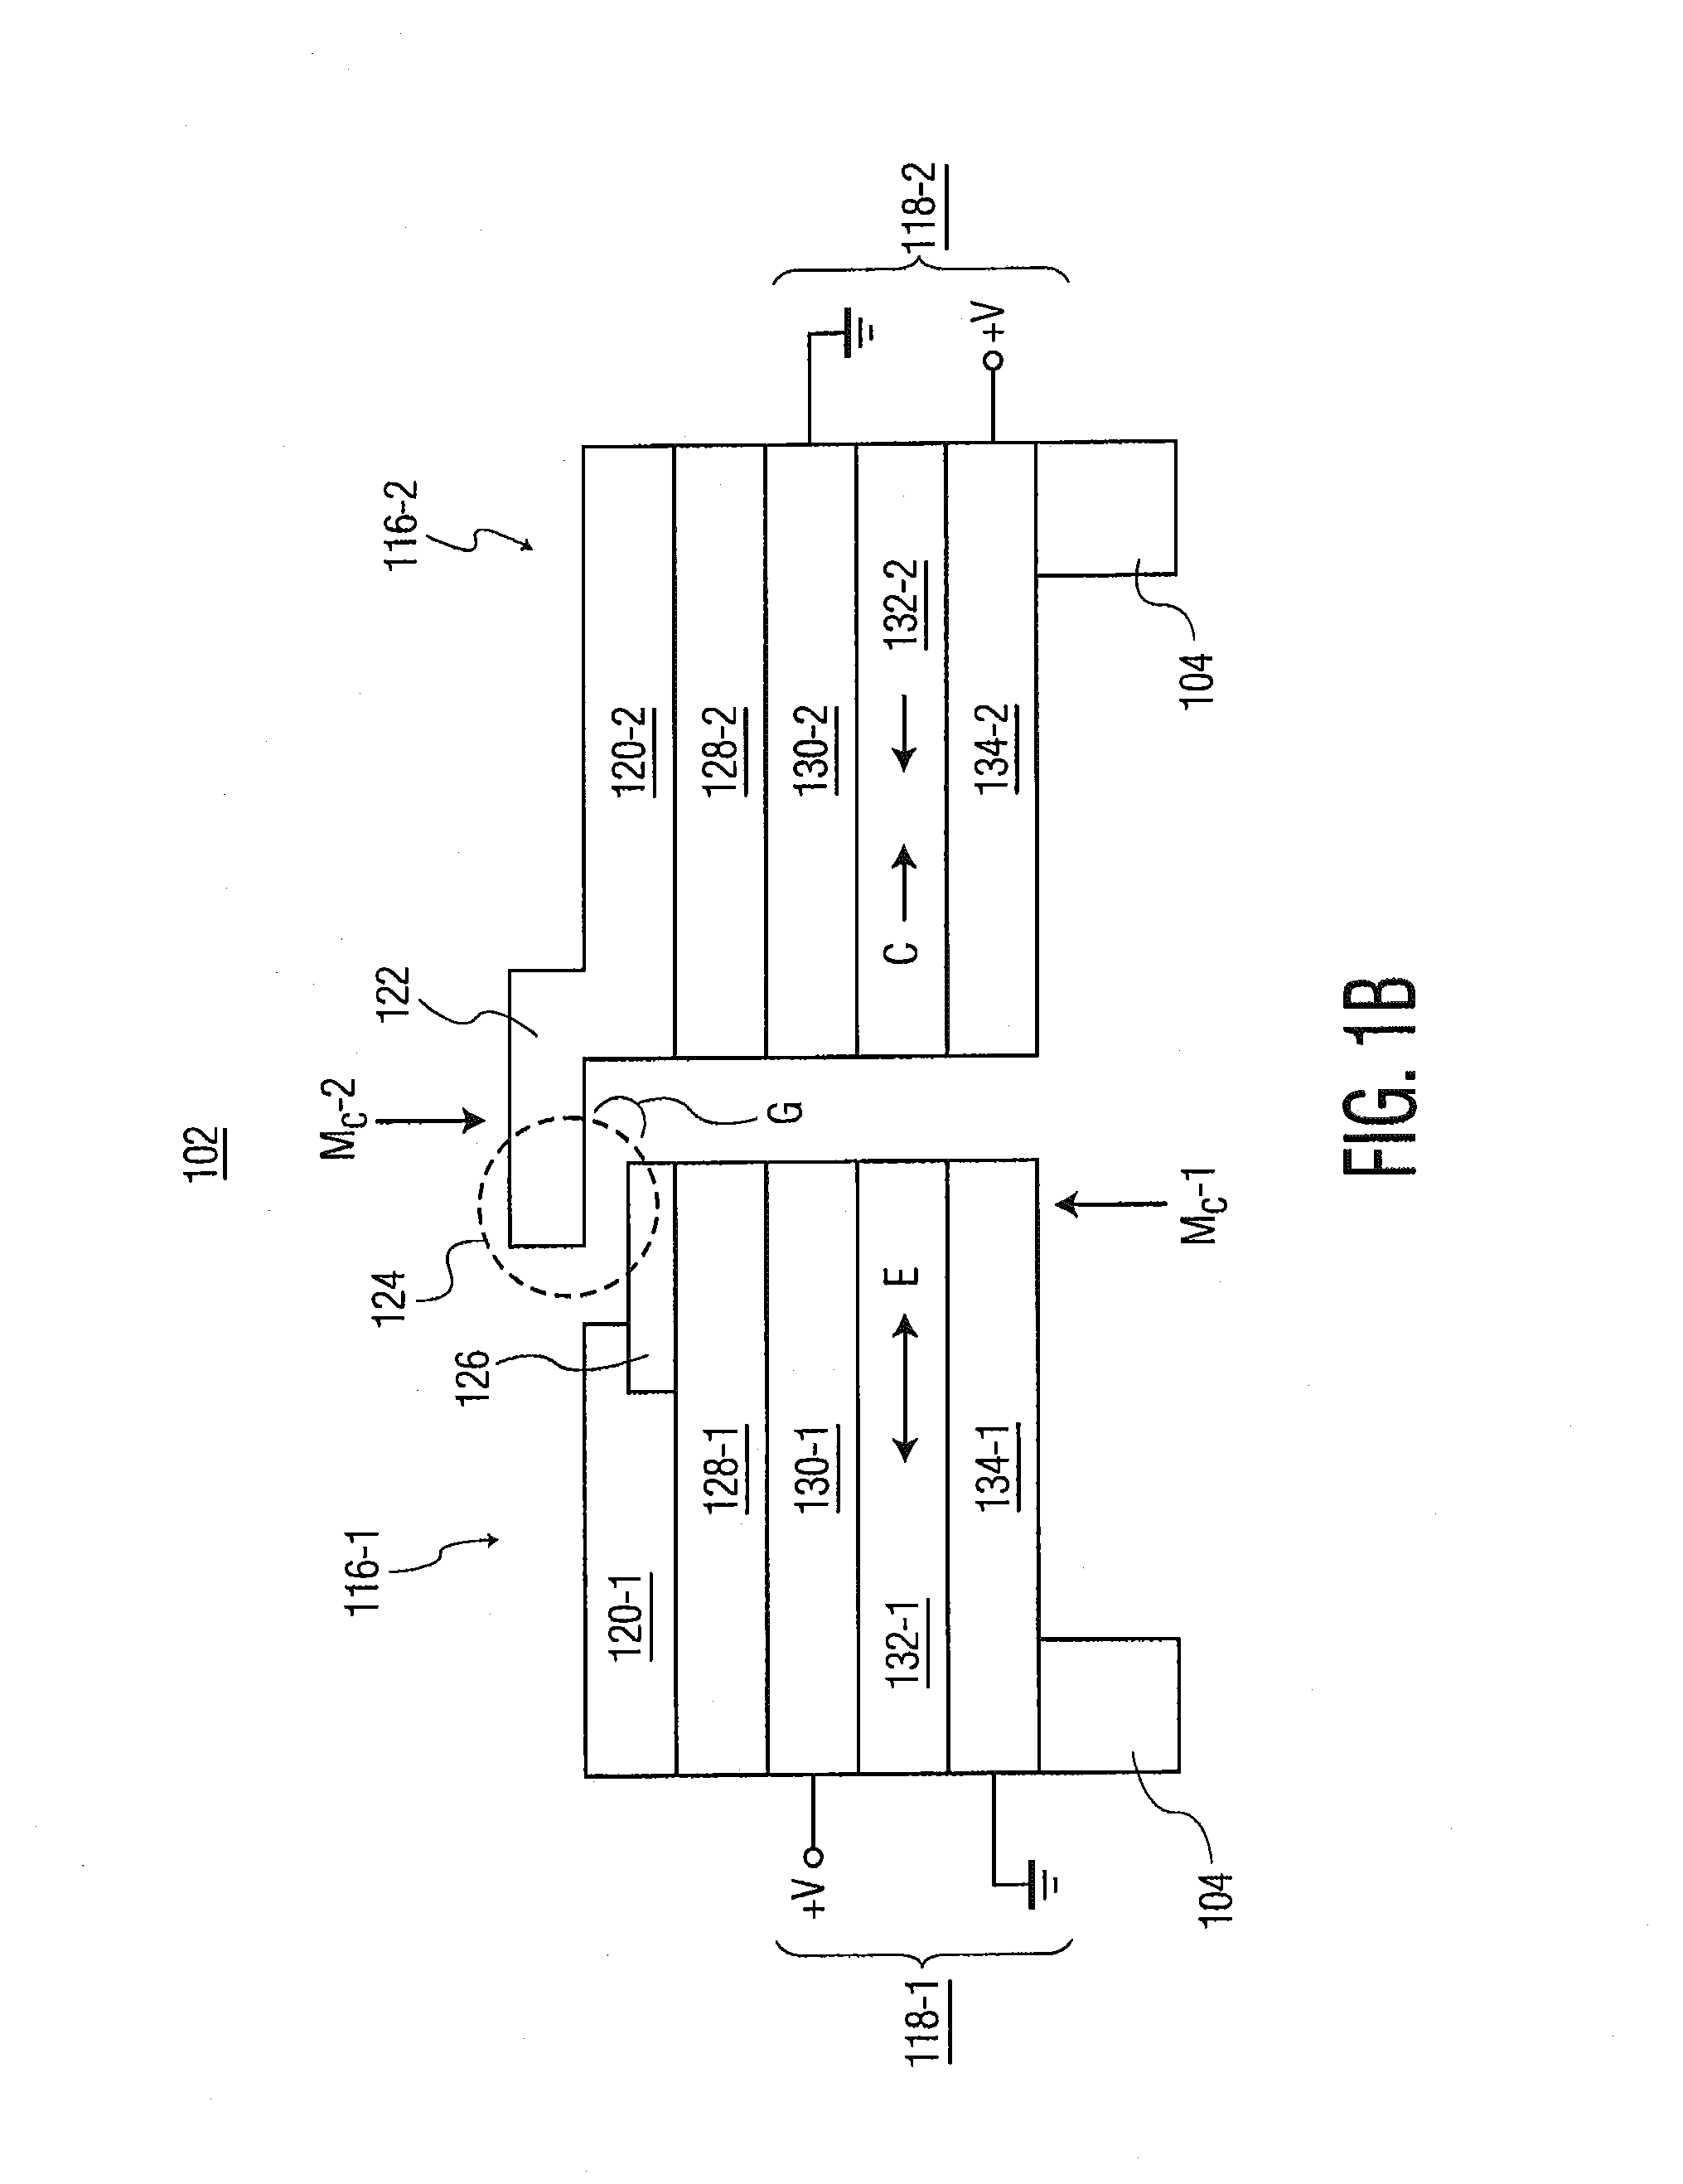 Systems and methods for operating piezoelectric switches